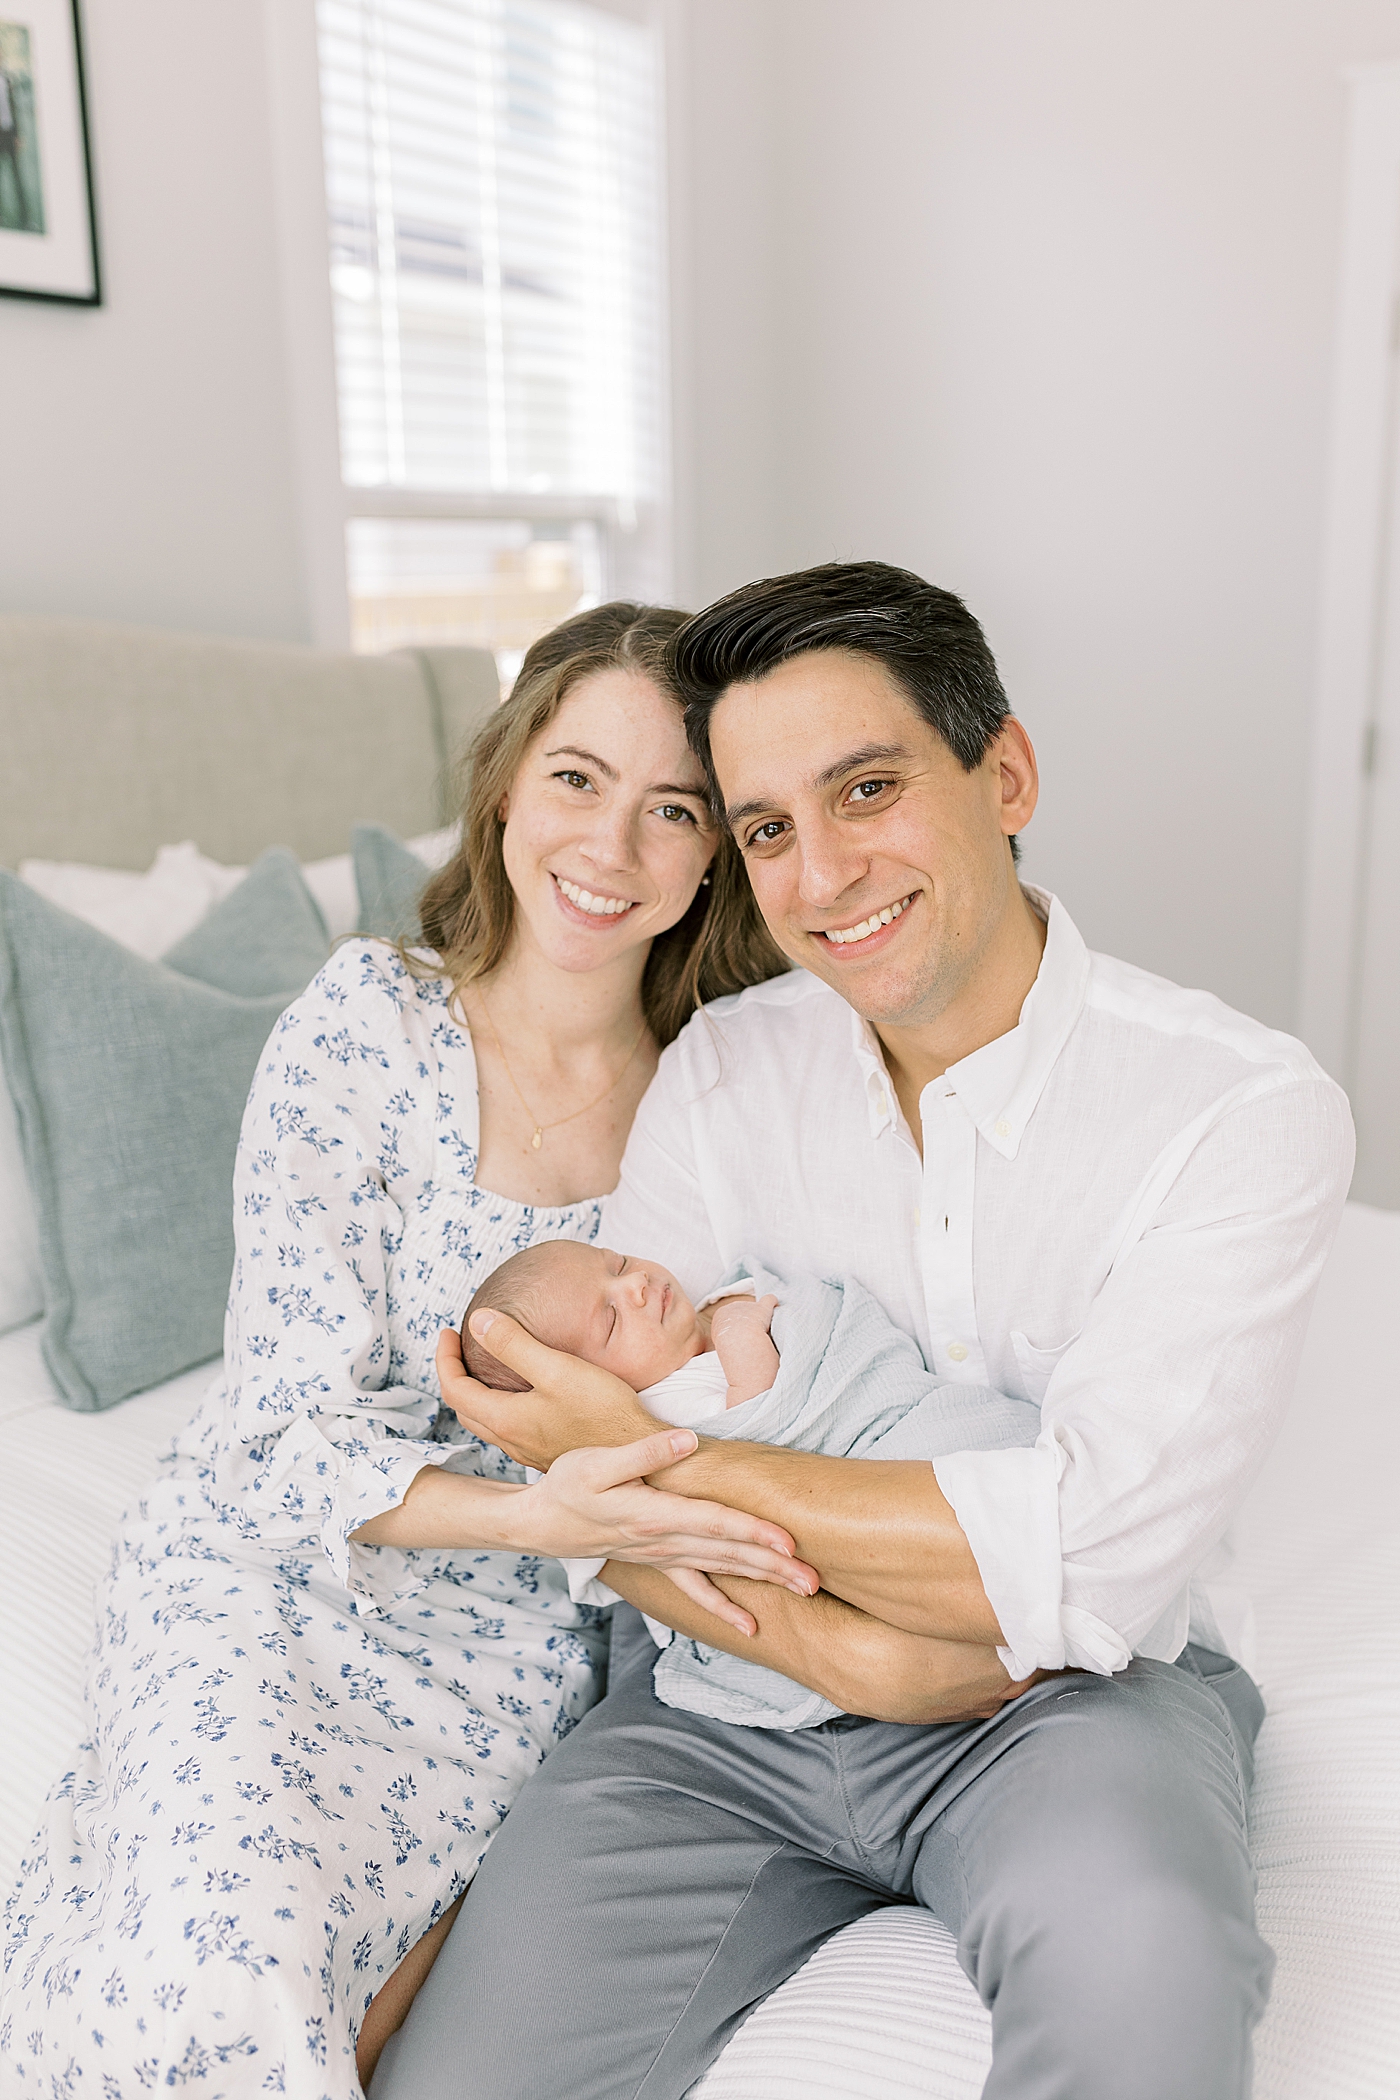 Mom and dad holding their new baby during lifestyle newborn photos | Image by Caitlyn Motycka